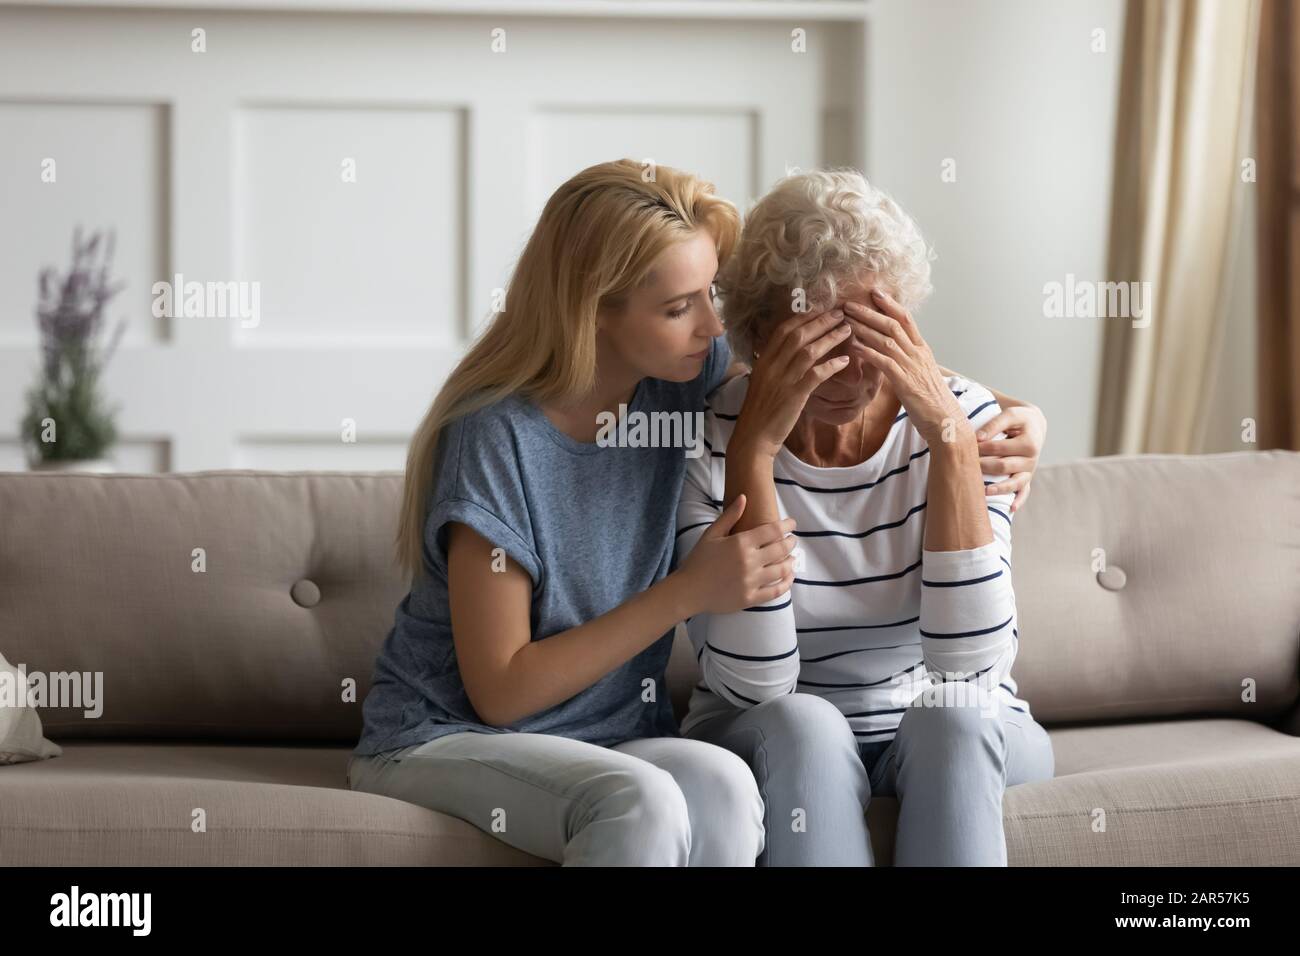 Worrying blonde young woman calming frustrated middle aged mommy. Stock Photo